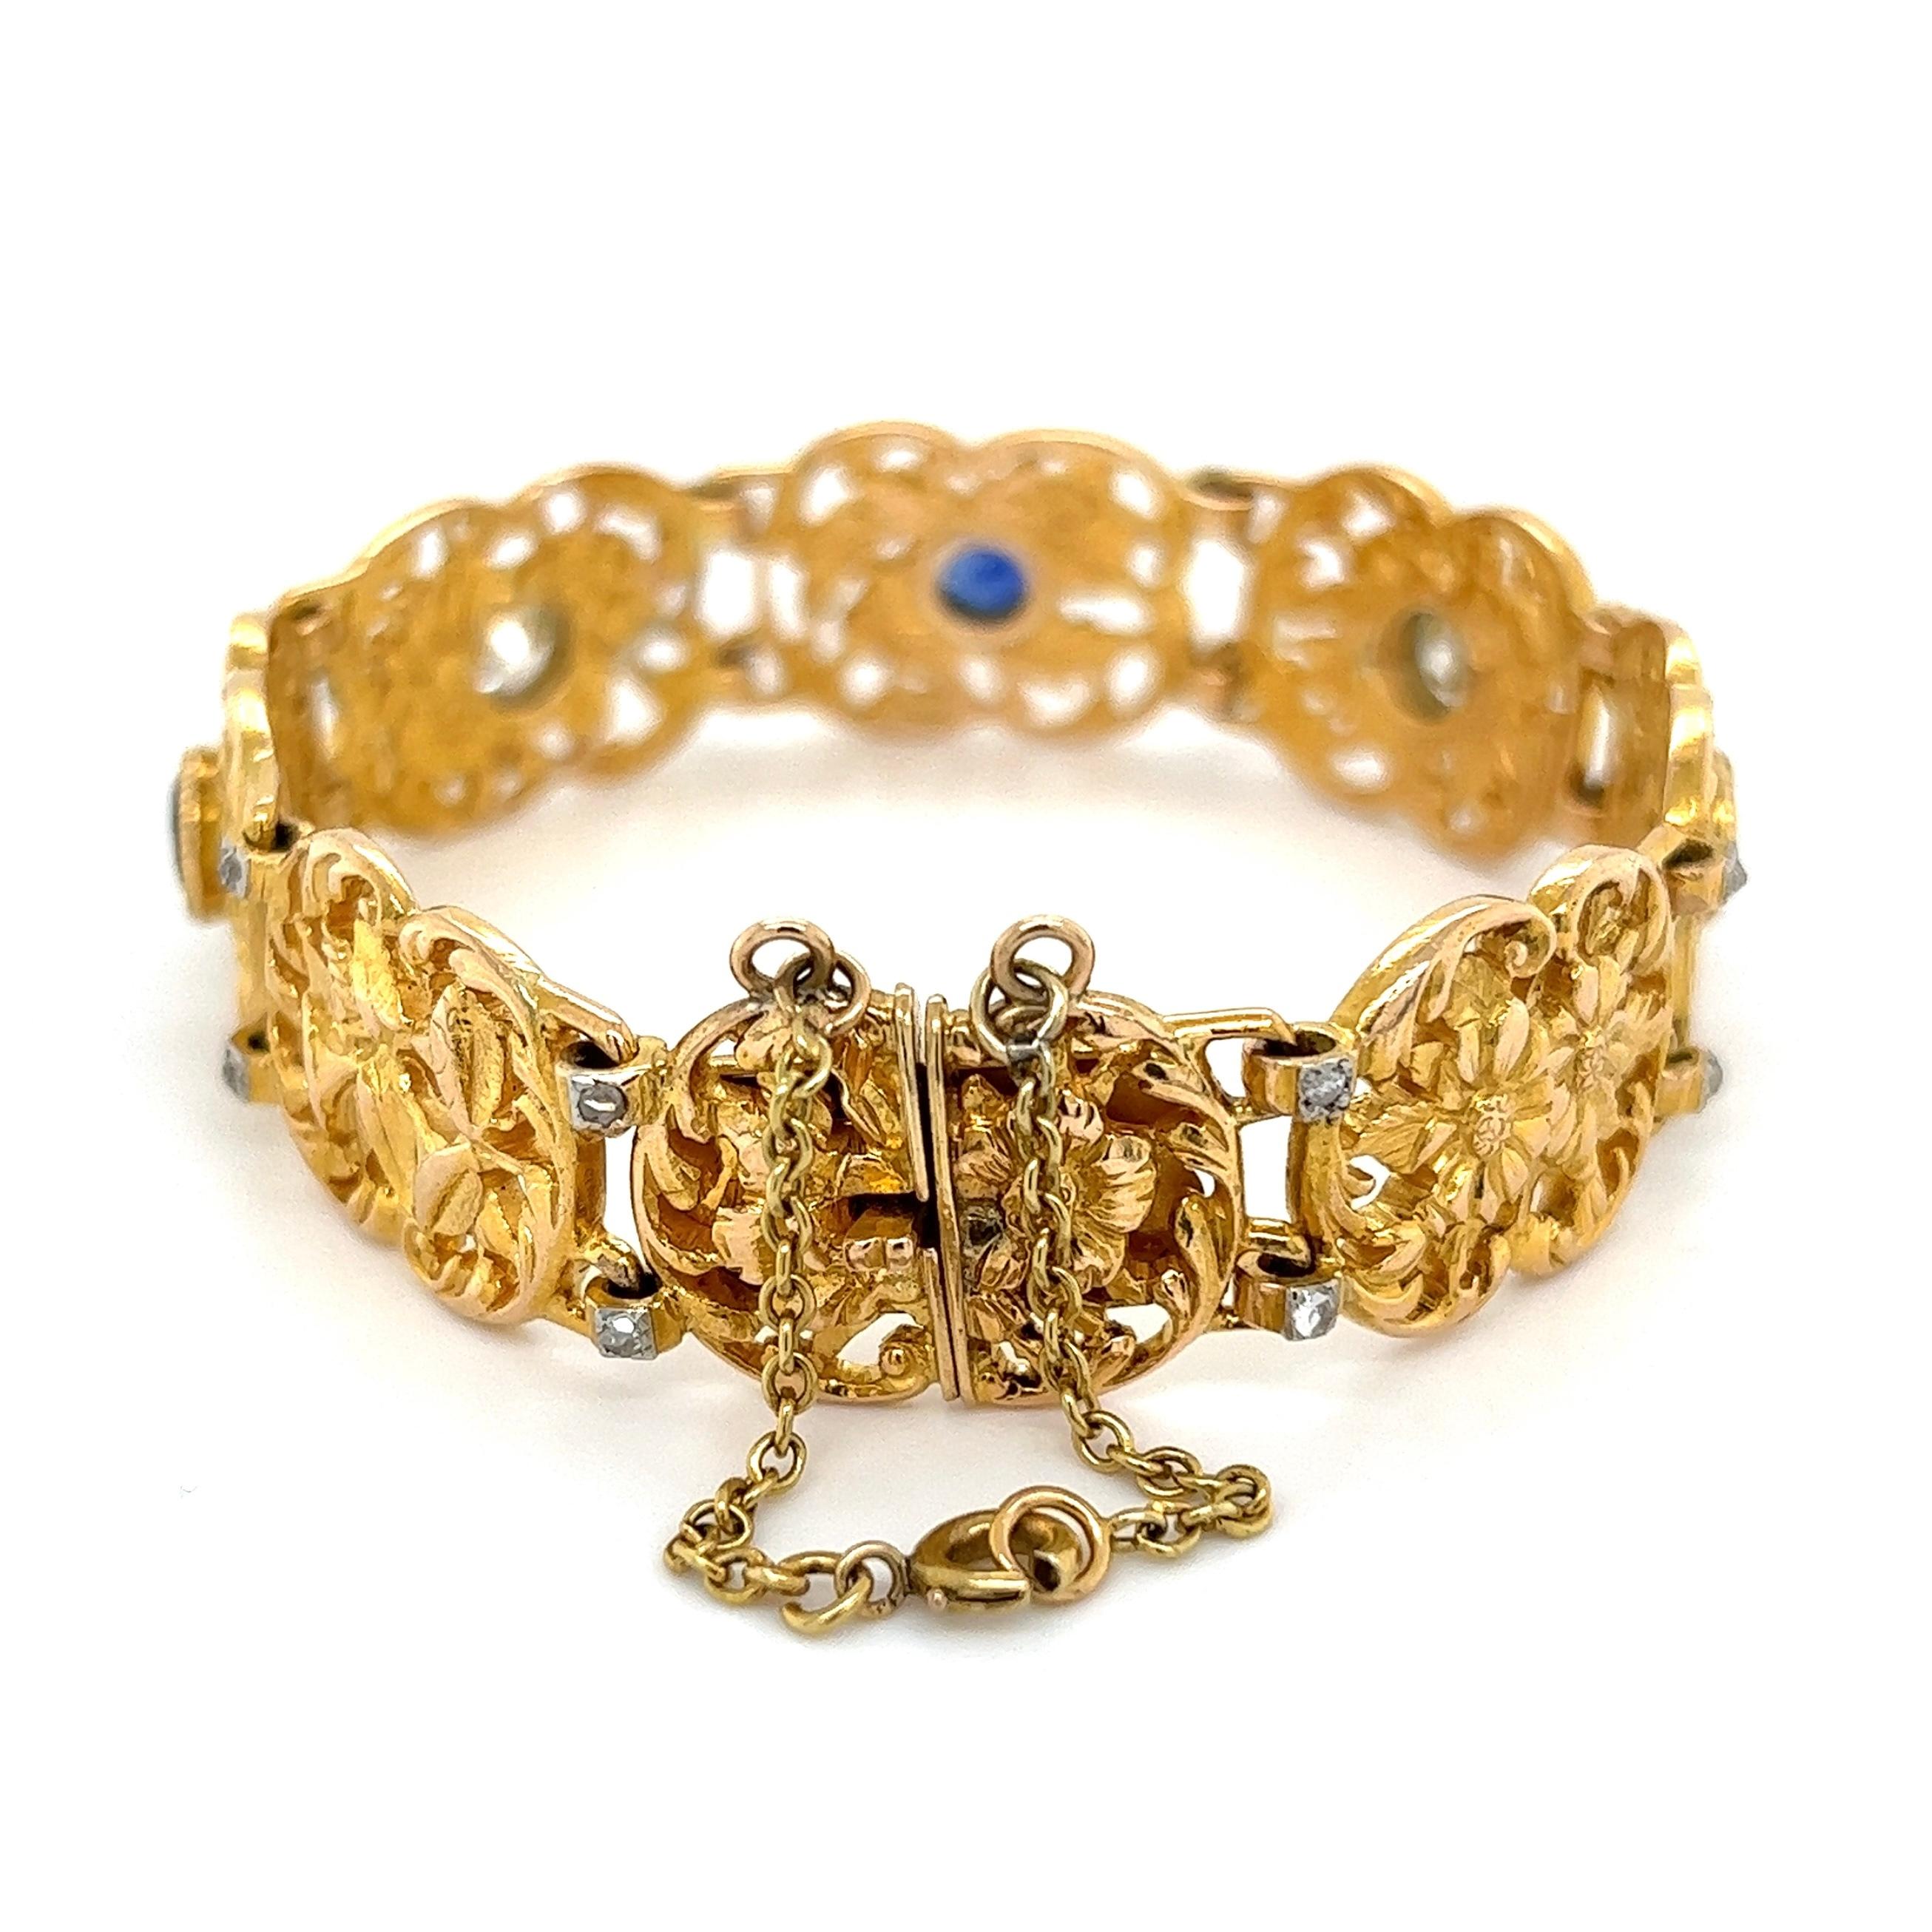 Sapphire and Diamond Edwardian Gold Link Bracelet Estate Fine Jewelry In Excellent Condition For Sale In Montreal, QC